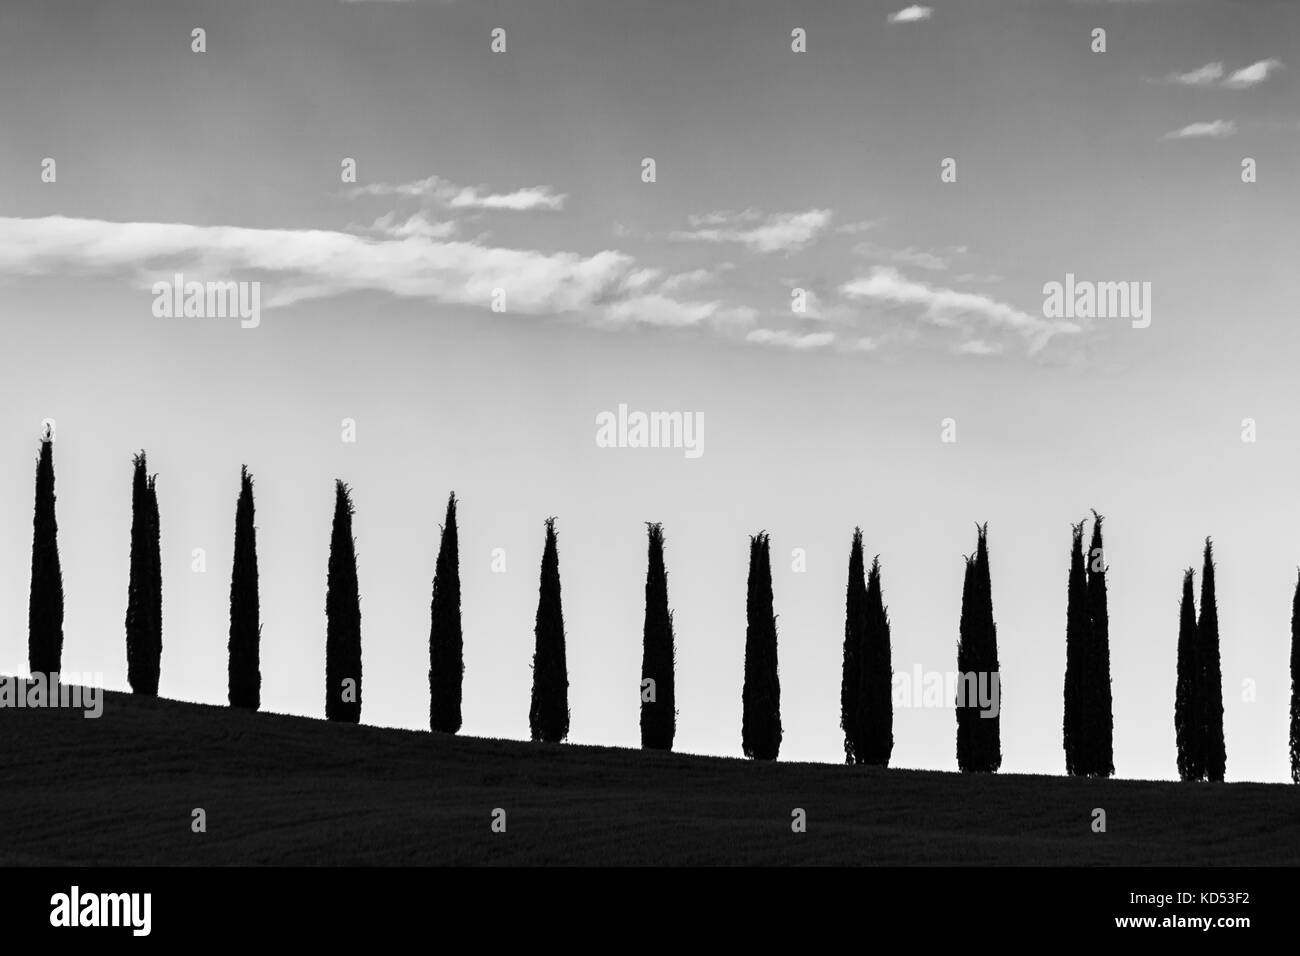 A line of cypresses following an hill profile, beneath a big sky, with some sparse clouds Stock Photo